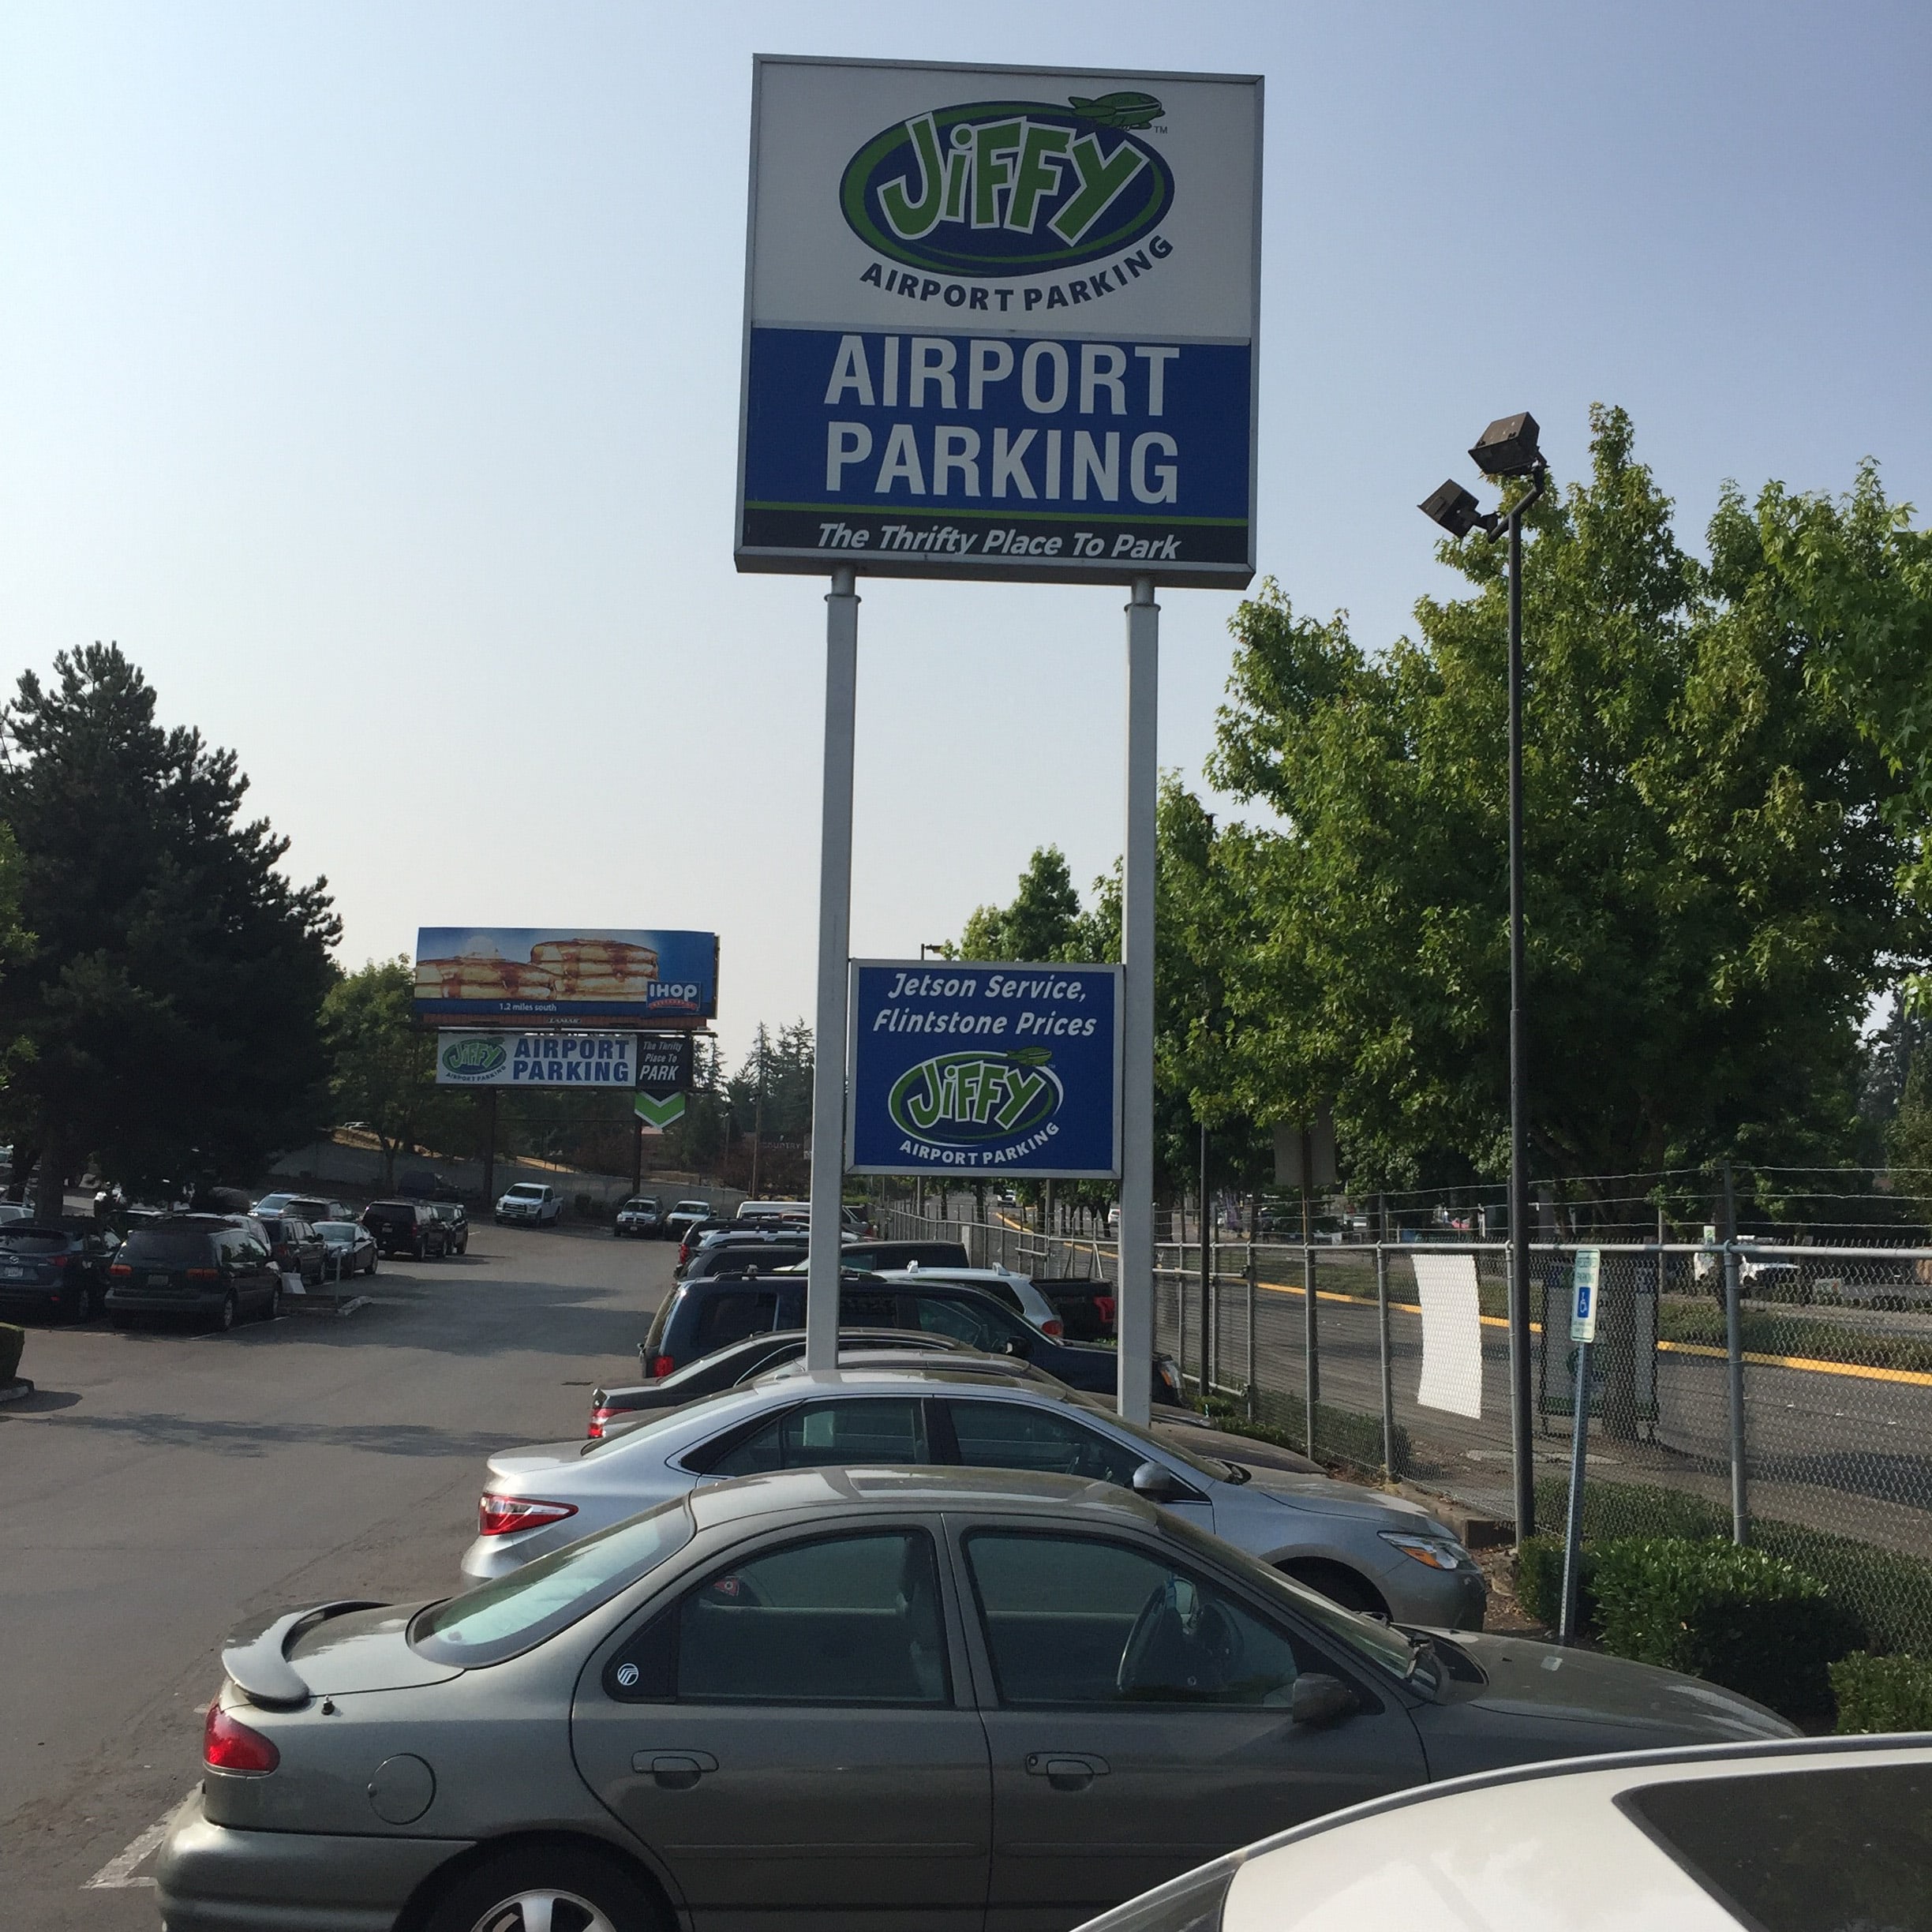 jiffy airport parking map